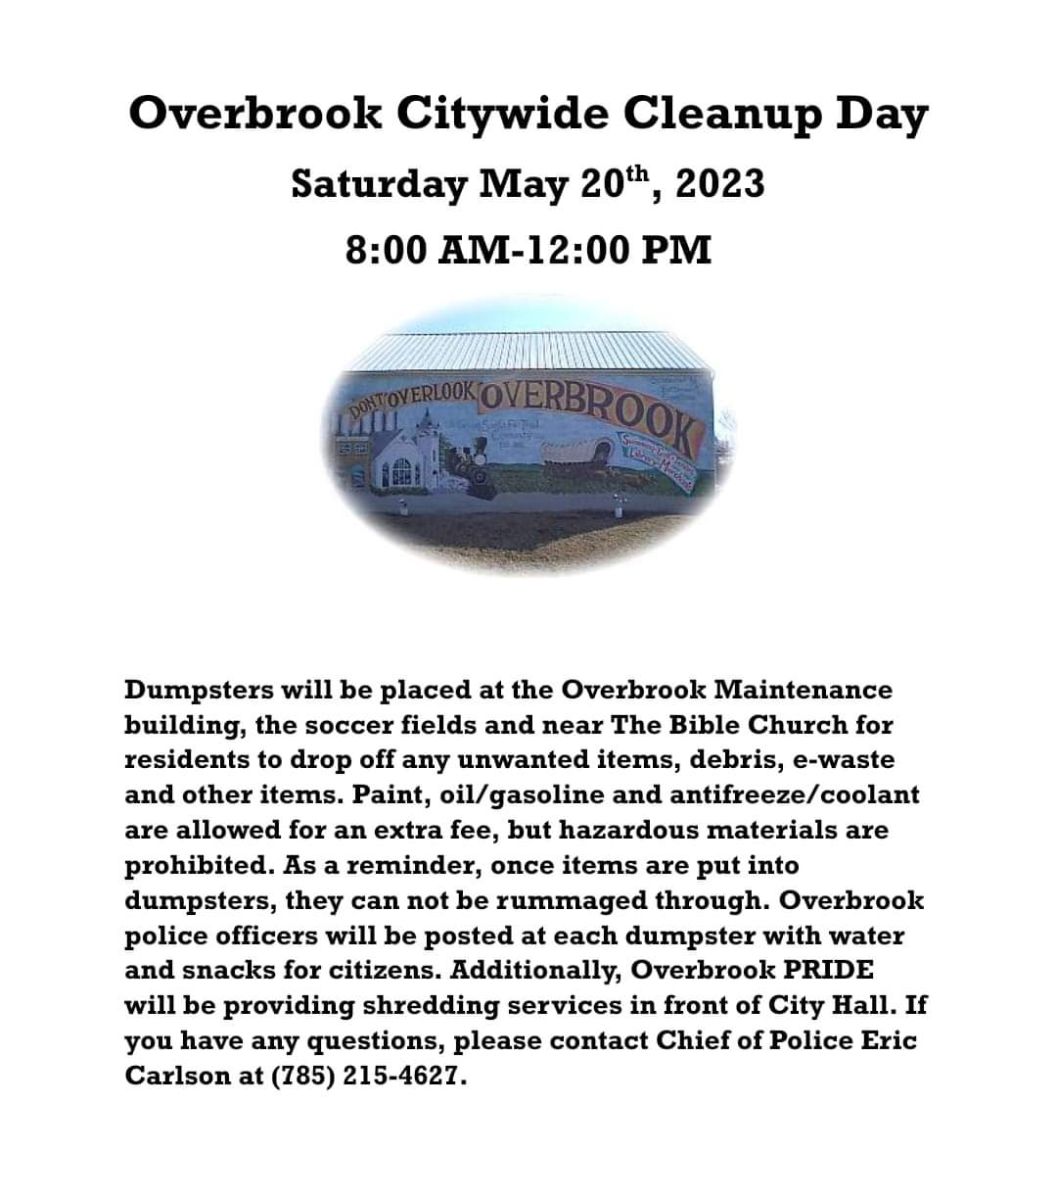 City Wide Cleanup Day Flyer